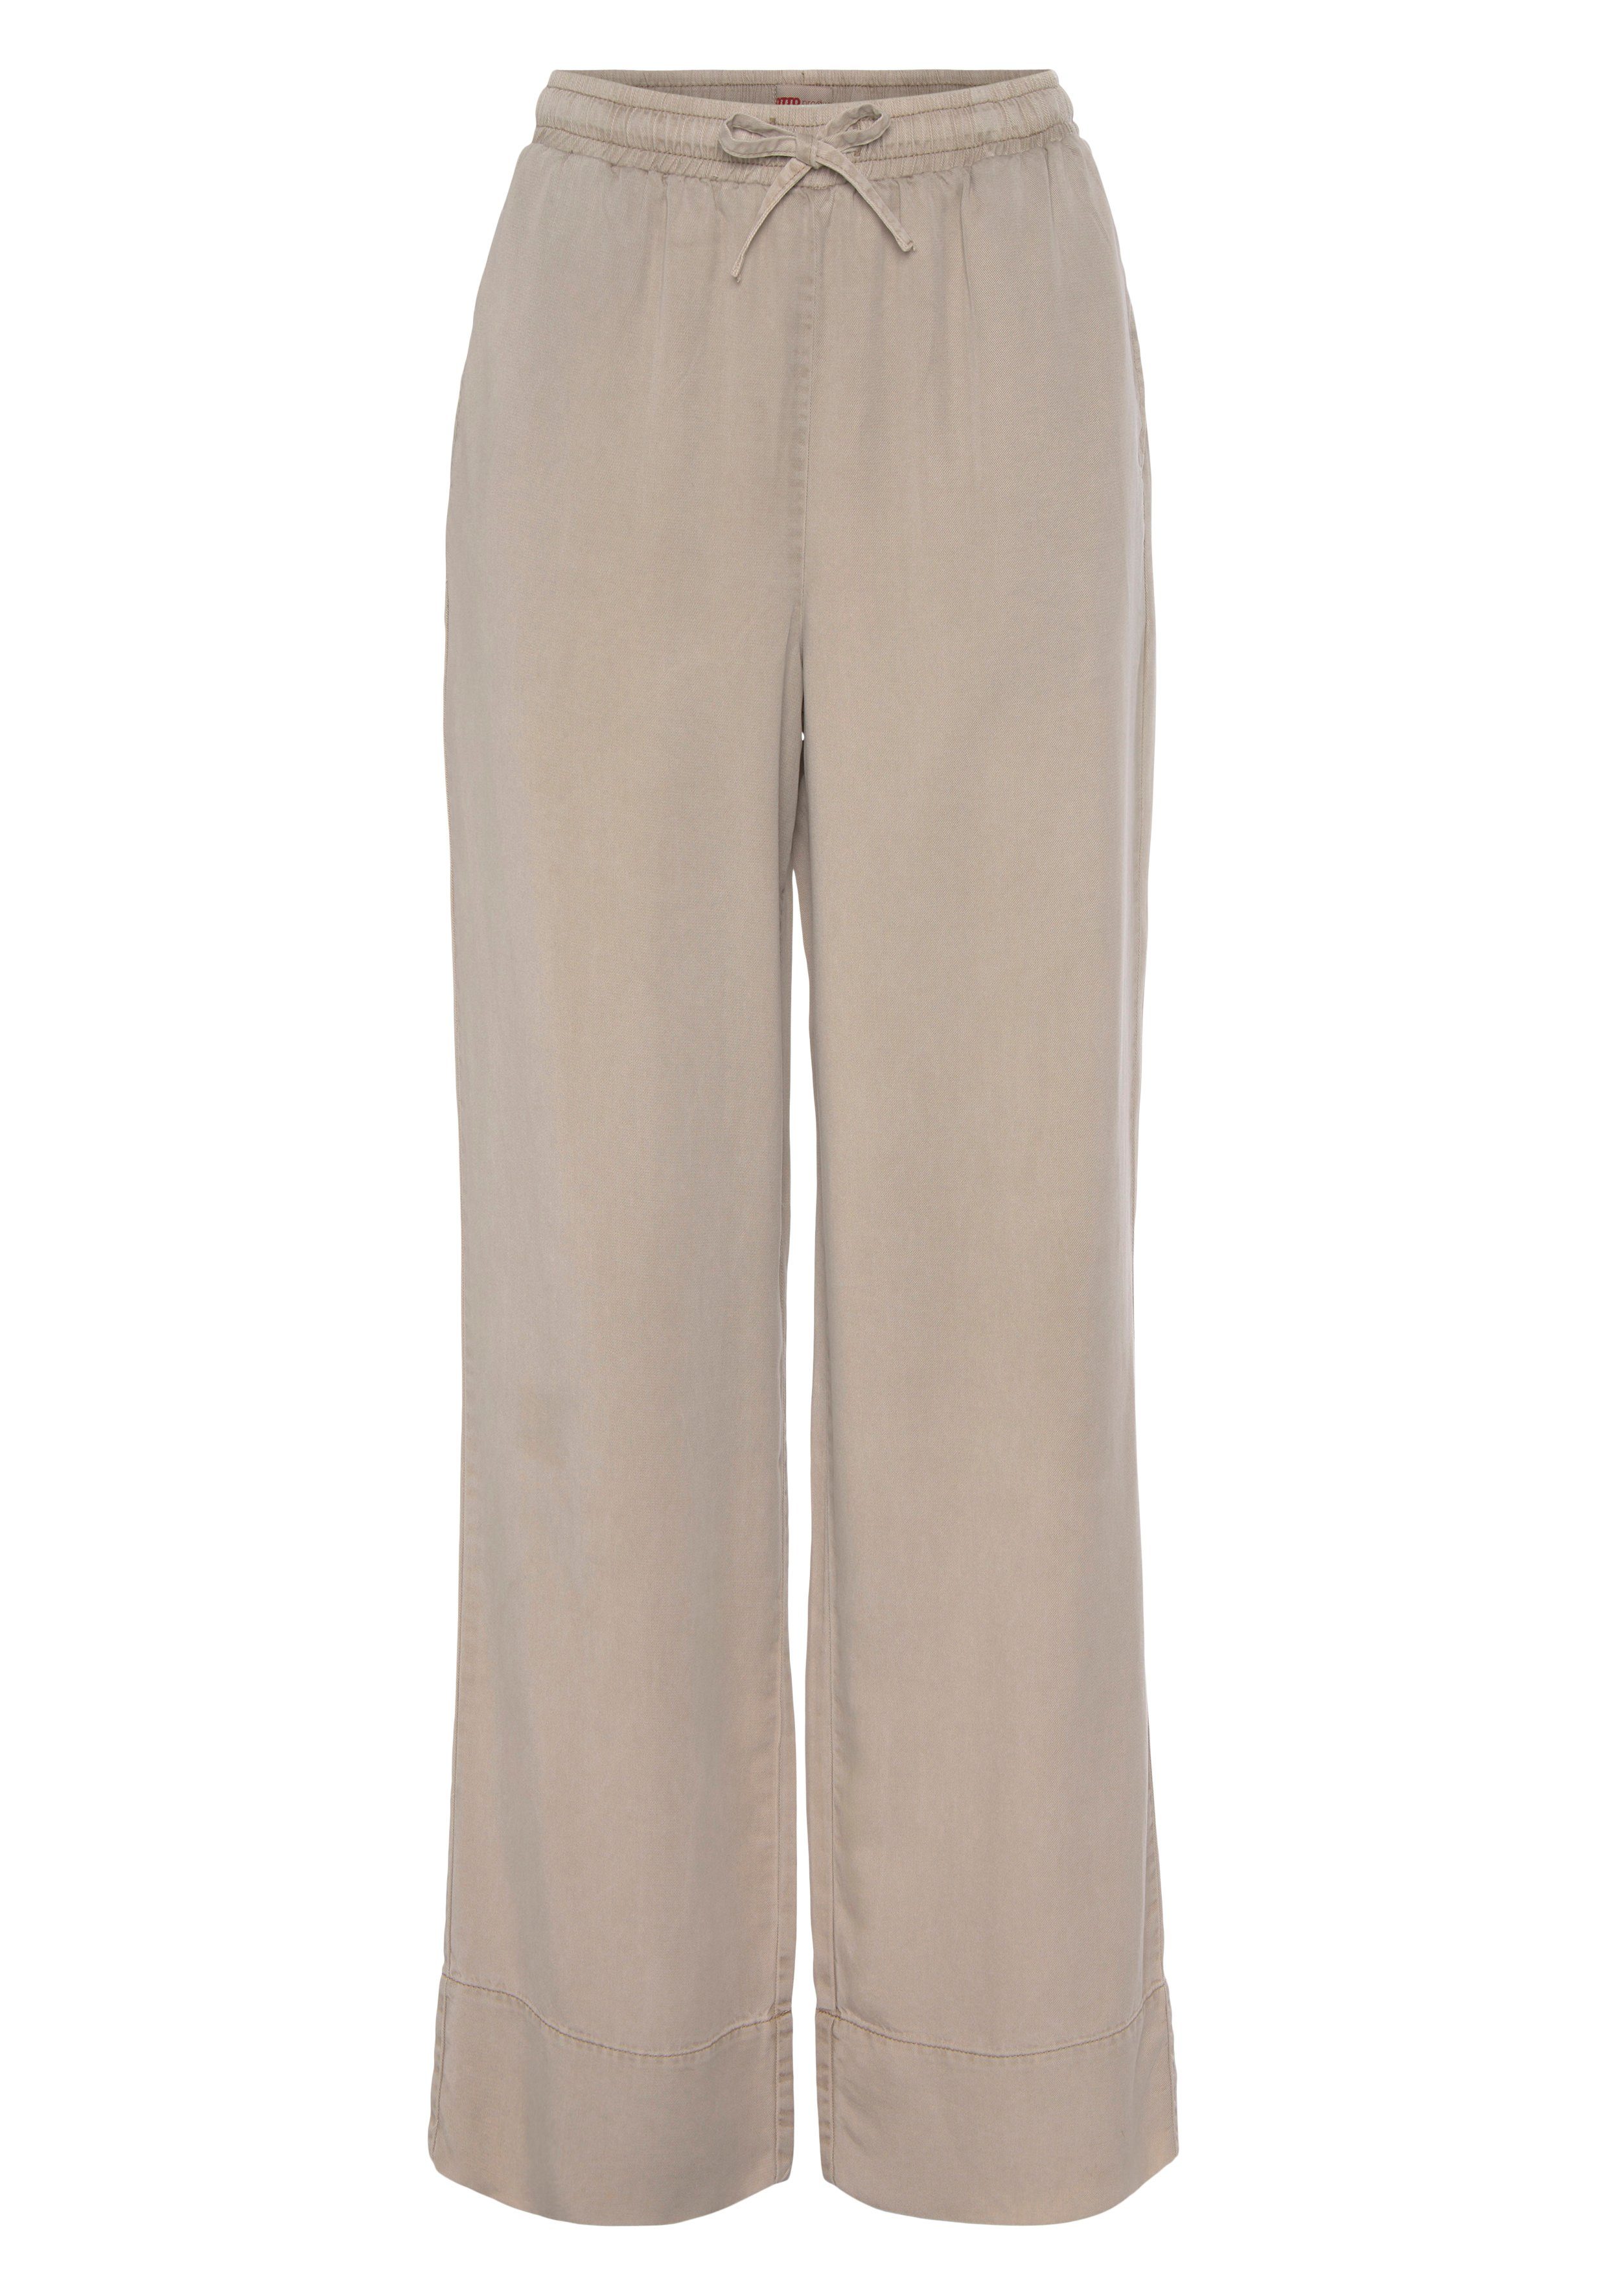 OTTO products Marlene-Hose COLLECTION beige CIRCULAR